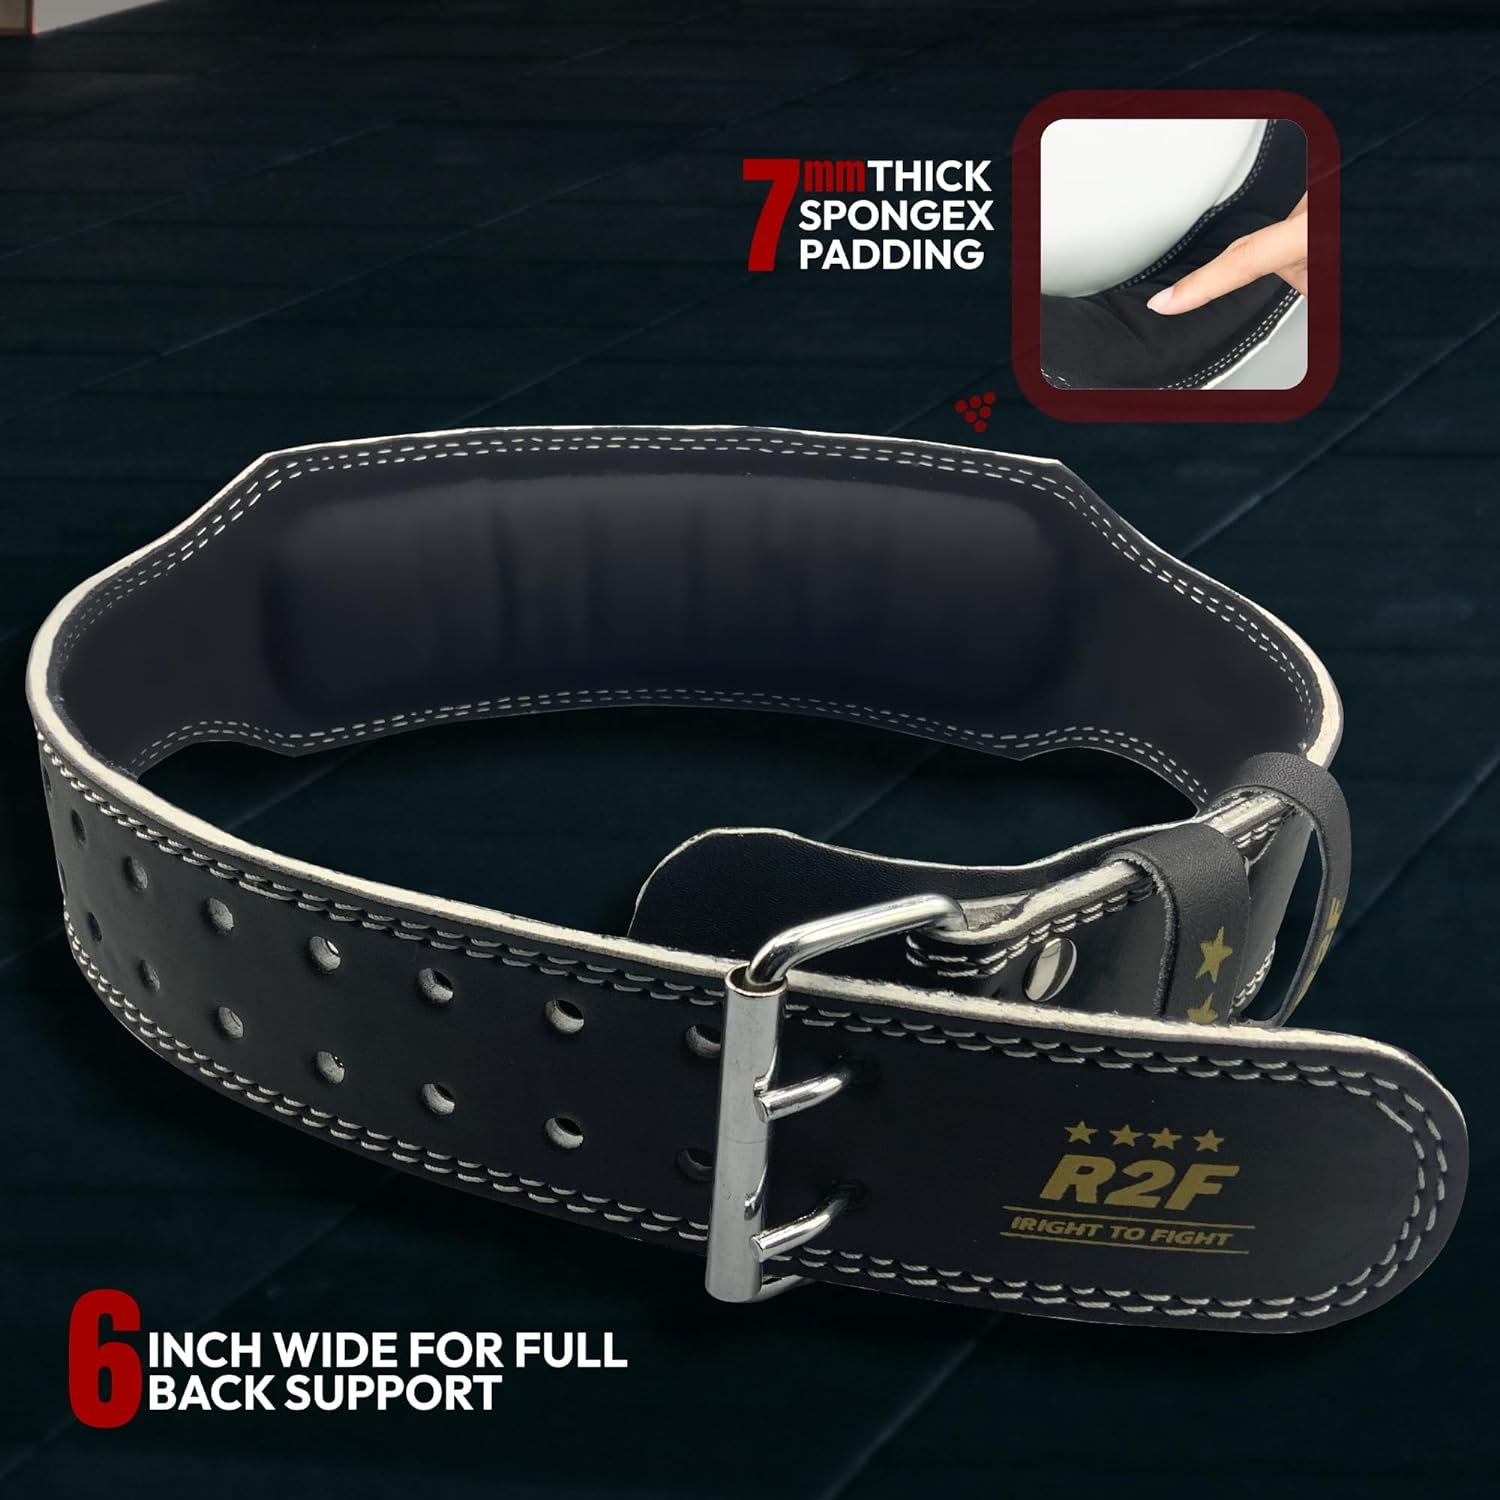 The R2F Sports Weight Lifting Belt is a high-quality leather belt designed for maximum support and comfort. With its 4-inch padded width, it provides excellent lumbar support during heavy lifting sessions. Shop now and take your weightlifting workouts to the next level with R2F Sports.